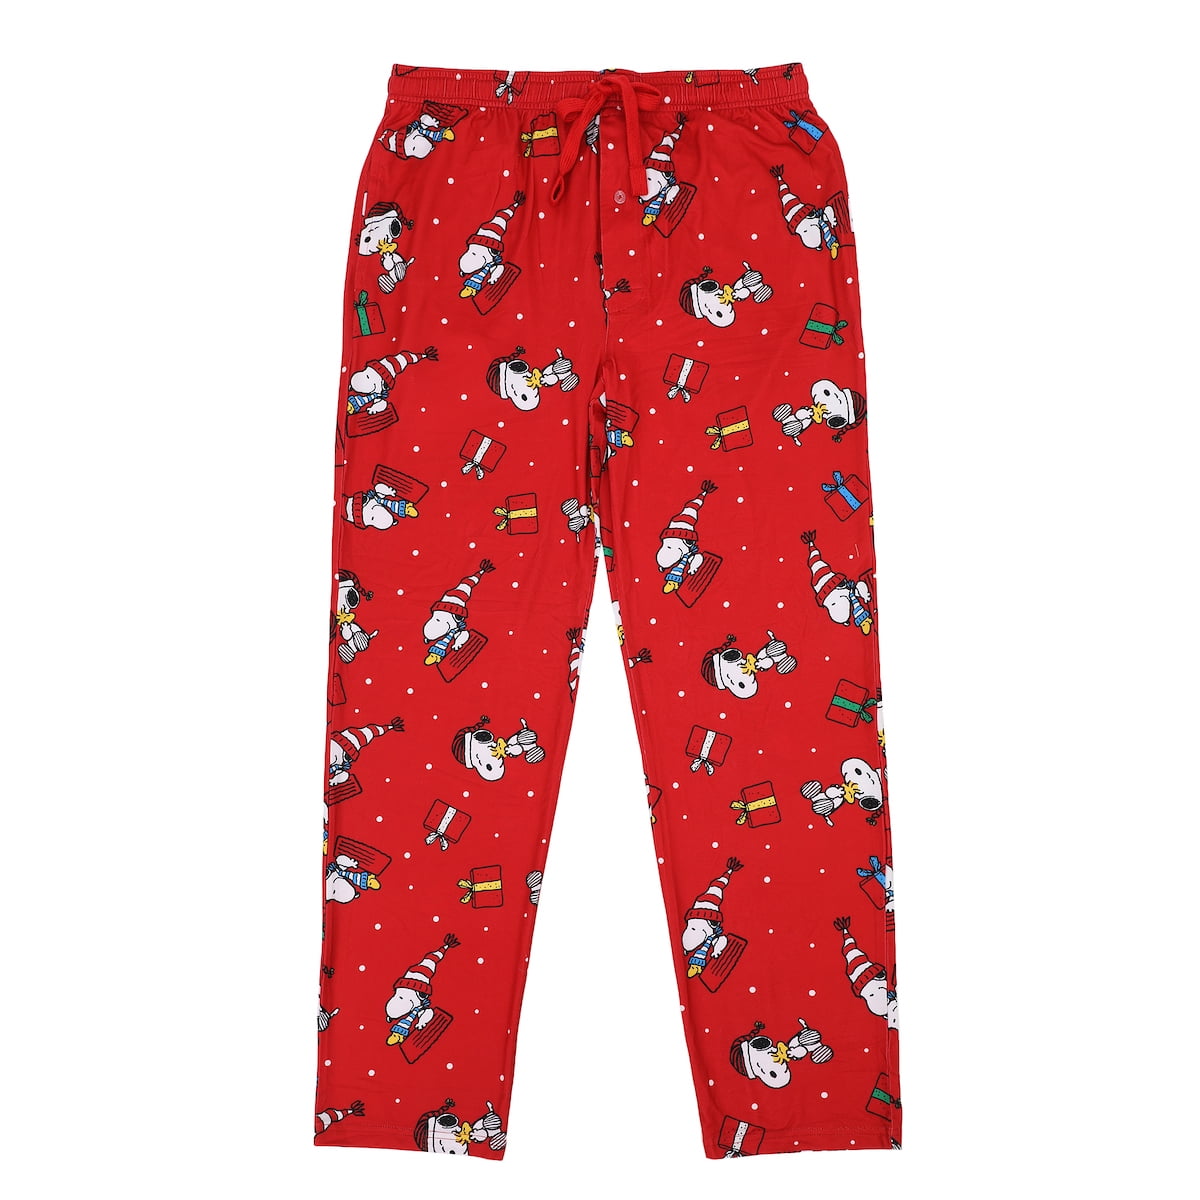 Men's Adult Peanuts Snoopy Red Holiday Sleep Pants-XS